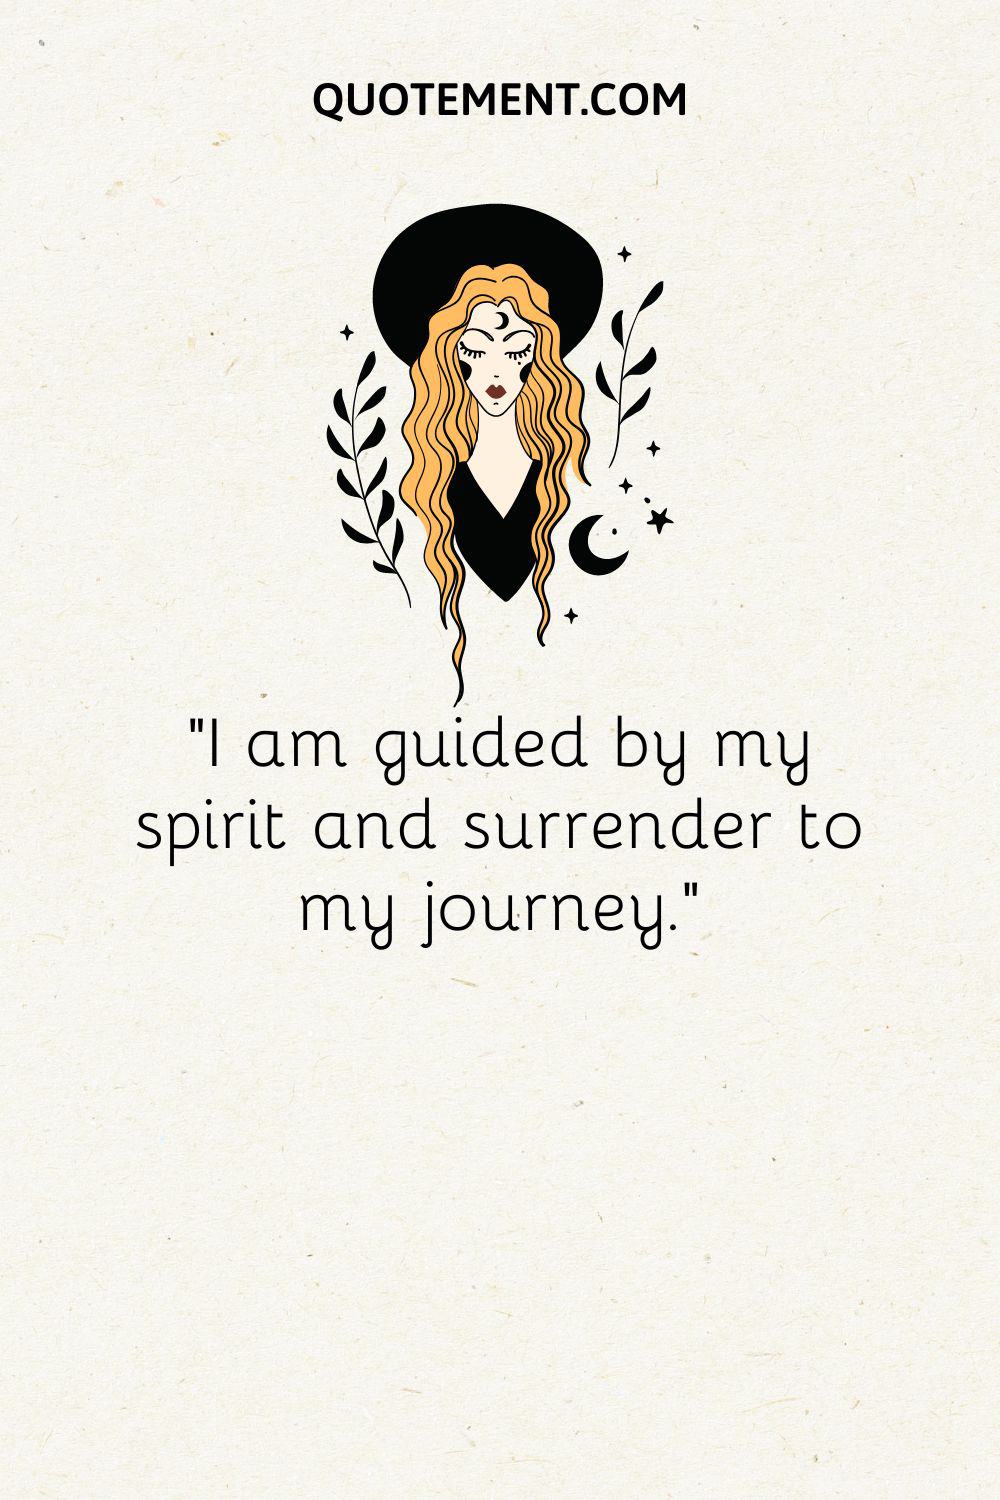 I am guided by my spirit and surrender to my journey